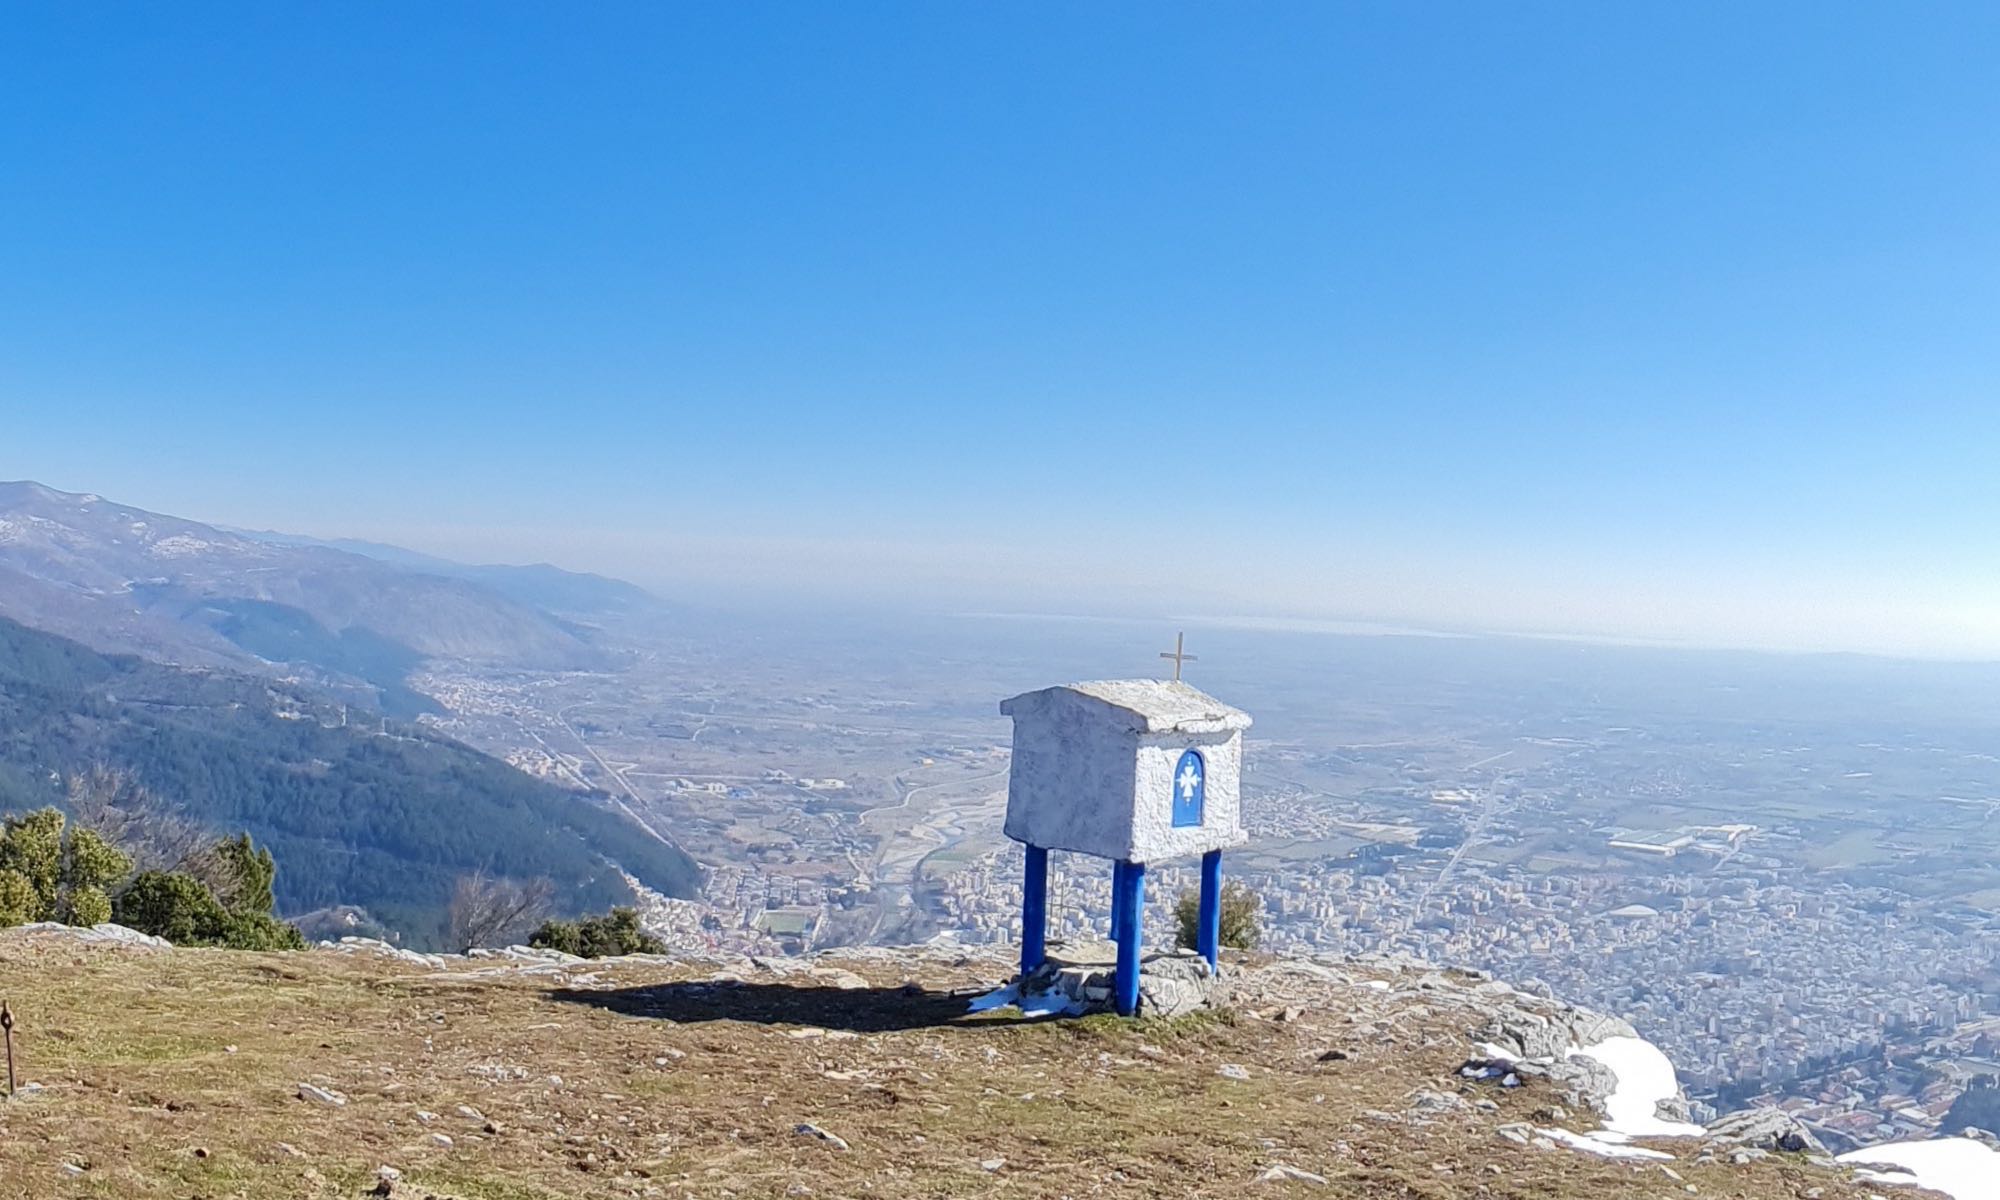 small church along the road in Greece on mountain cliff overlooking city blue sky